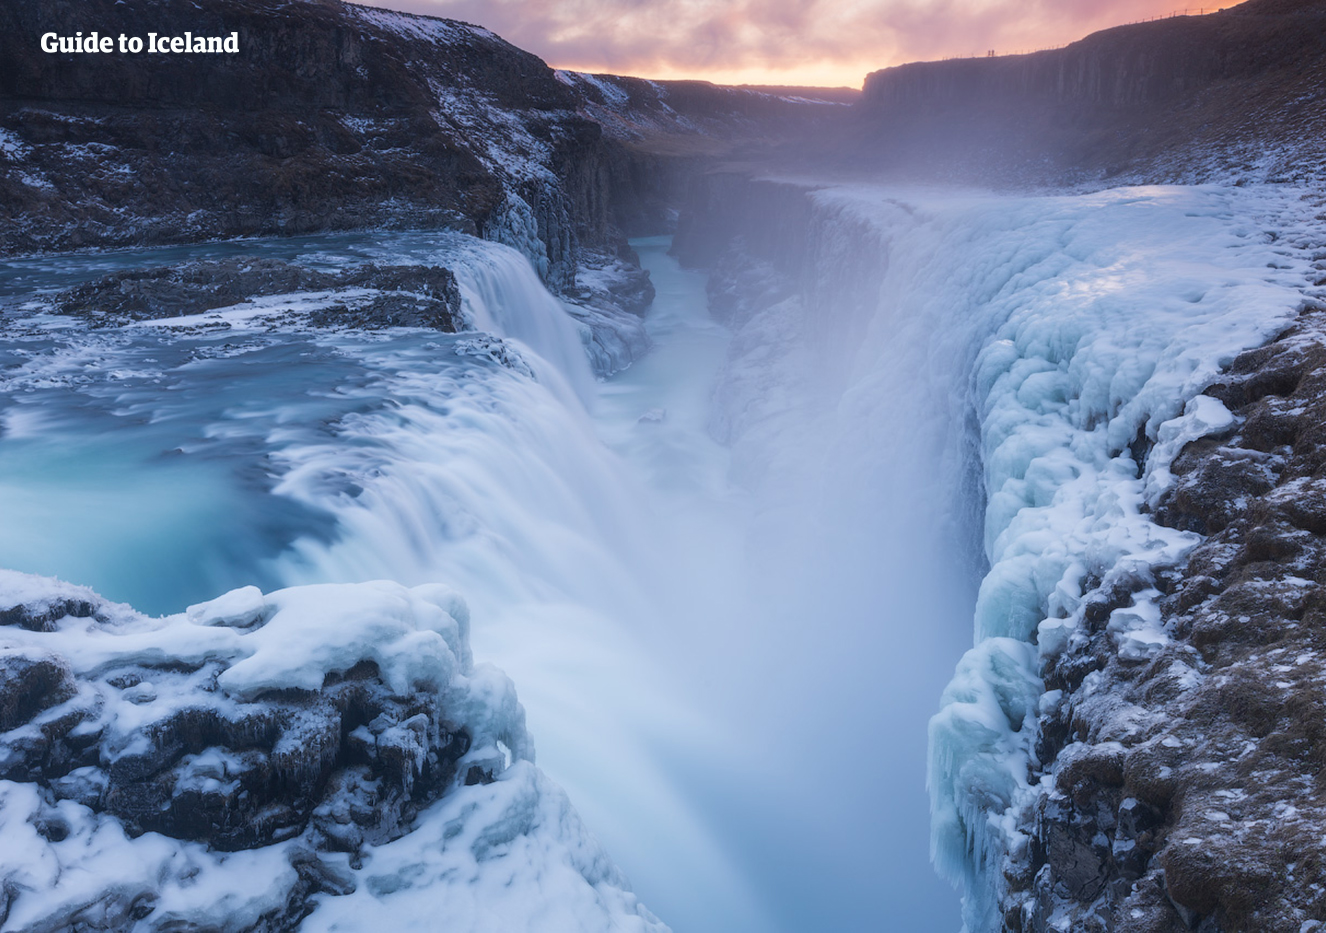 Gullfoss waterfall in winter becomes surrounded in ice and snow, yet the Hvíta river continues to forcefully flow.